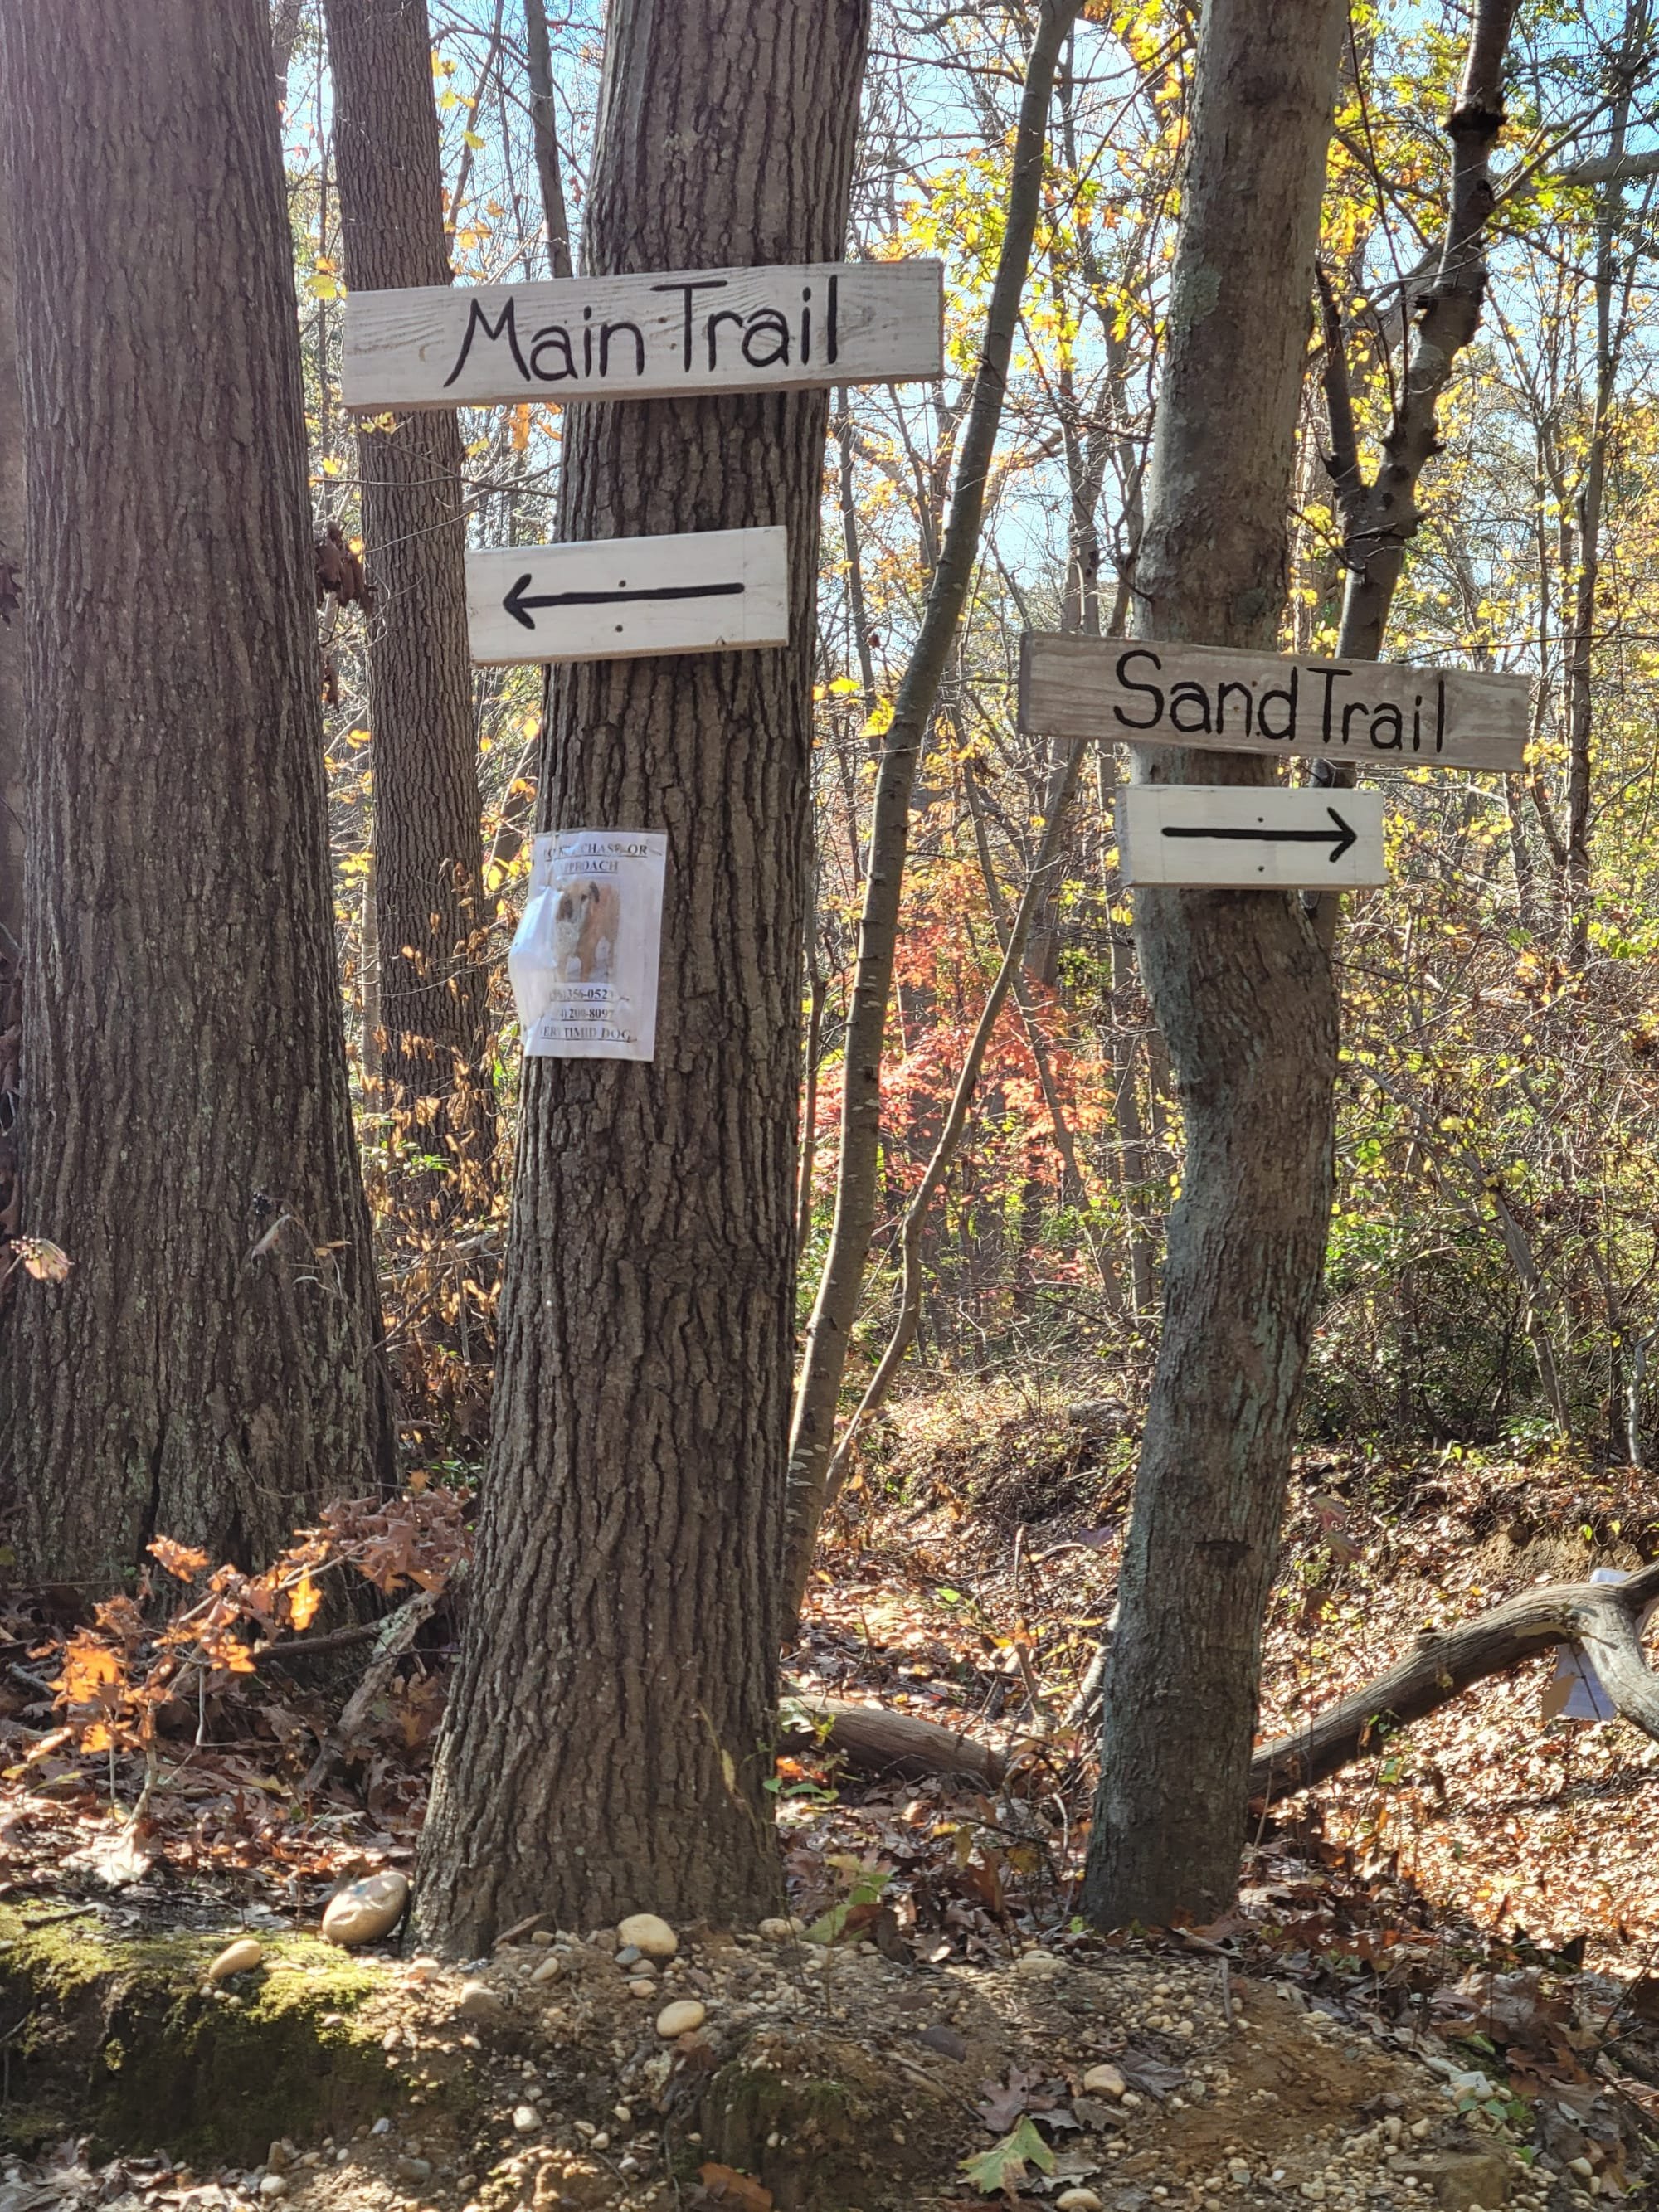 West Hills County Park (Melville, NY)